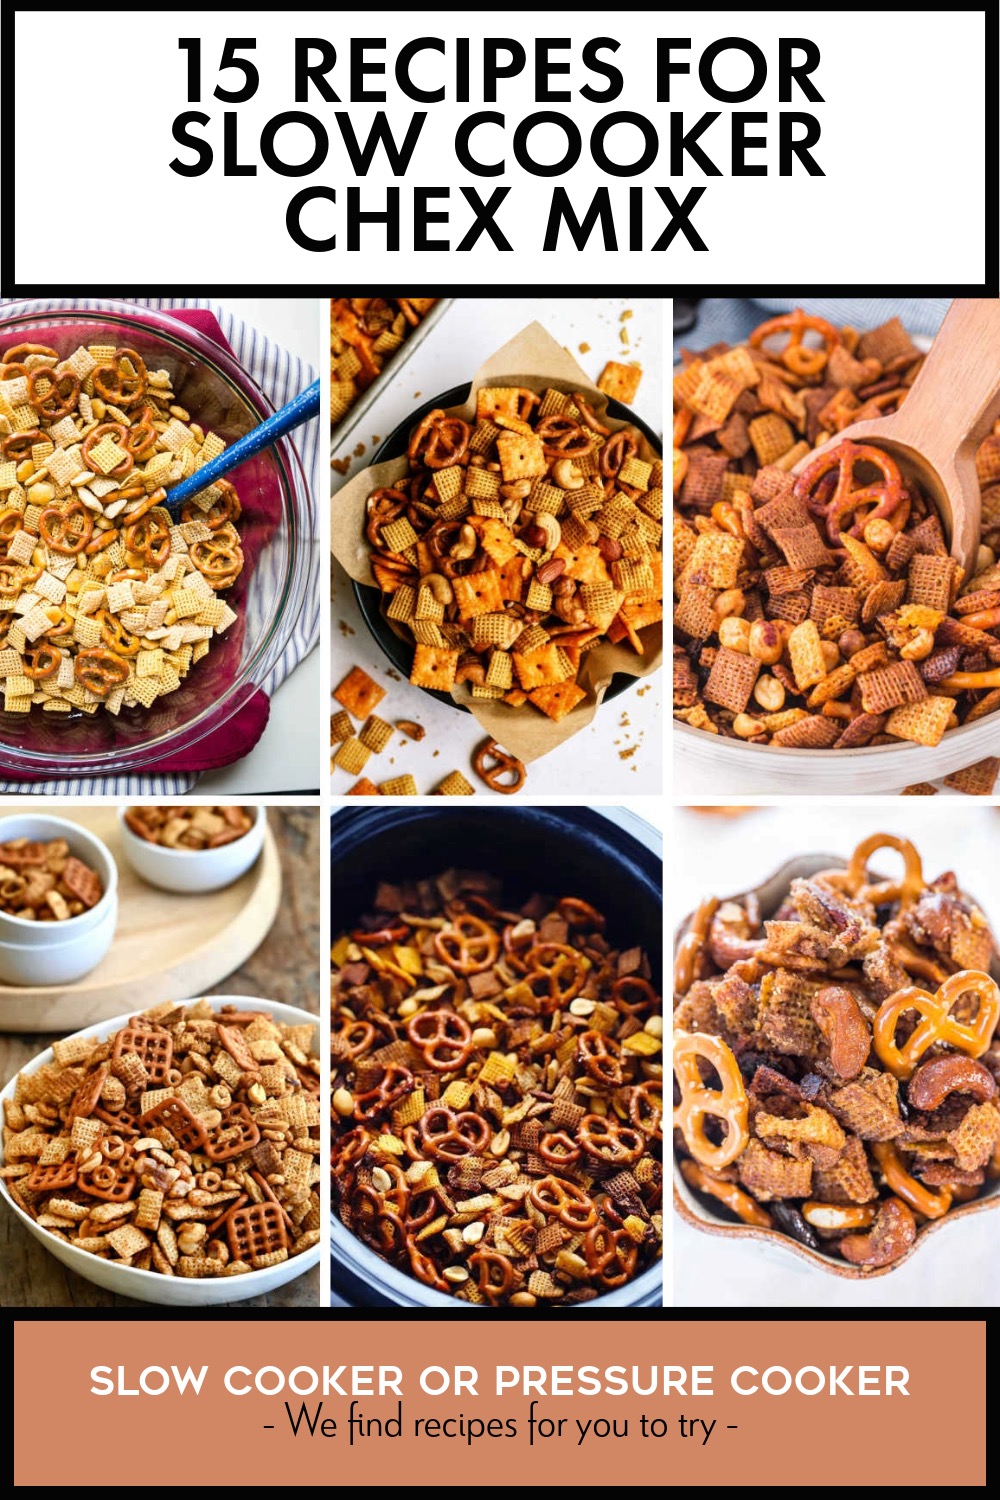 Pinterest image of 15 Recipes for Slow Cooker Chex Mix